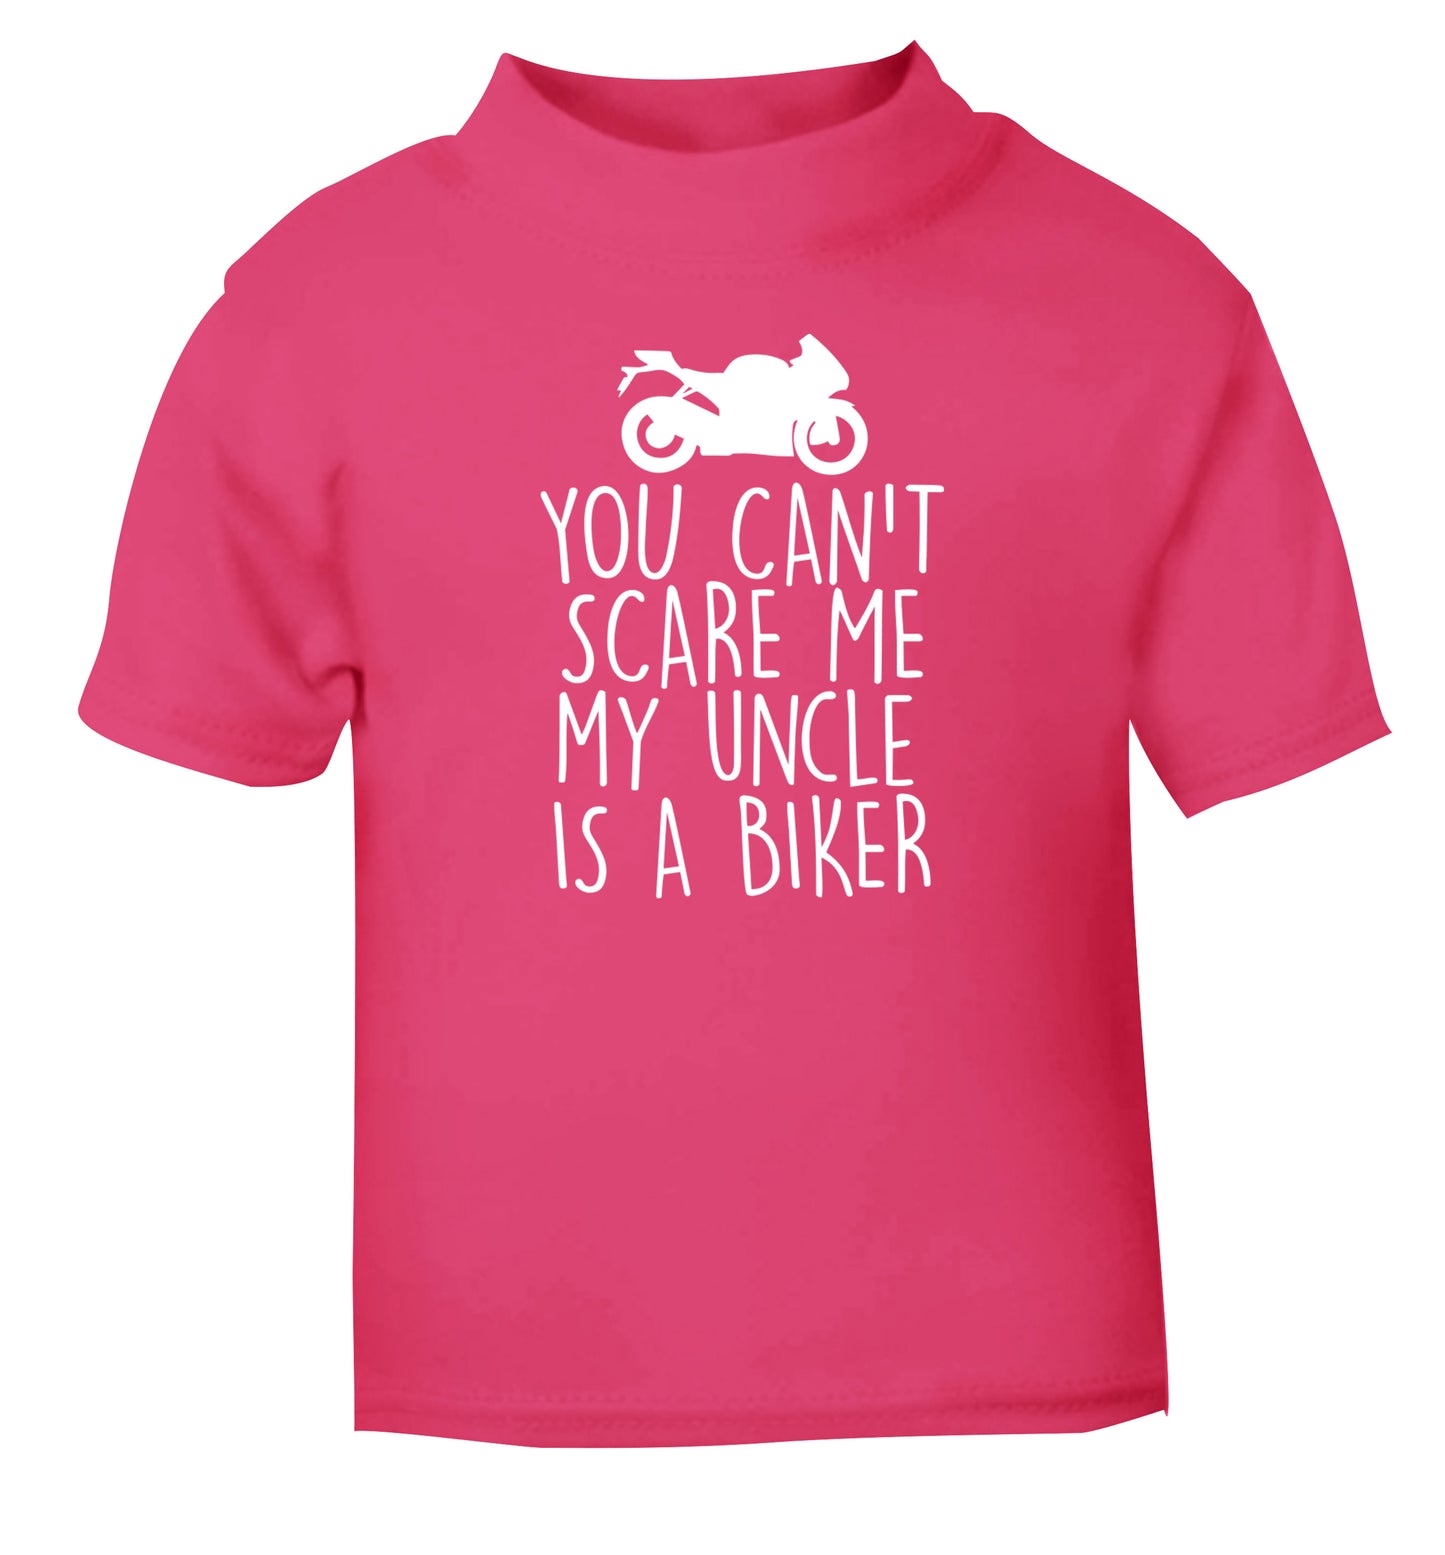 You can't scare me my uncle is a biker pink Baby Toddler Tshirt 2 Years